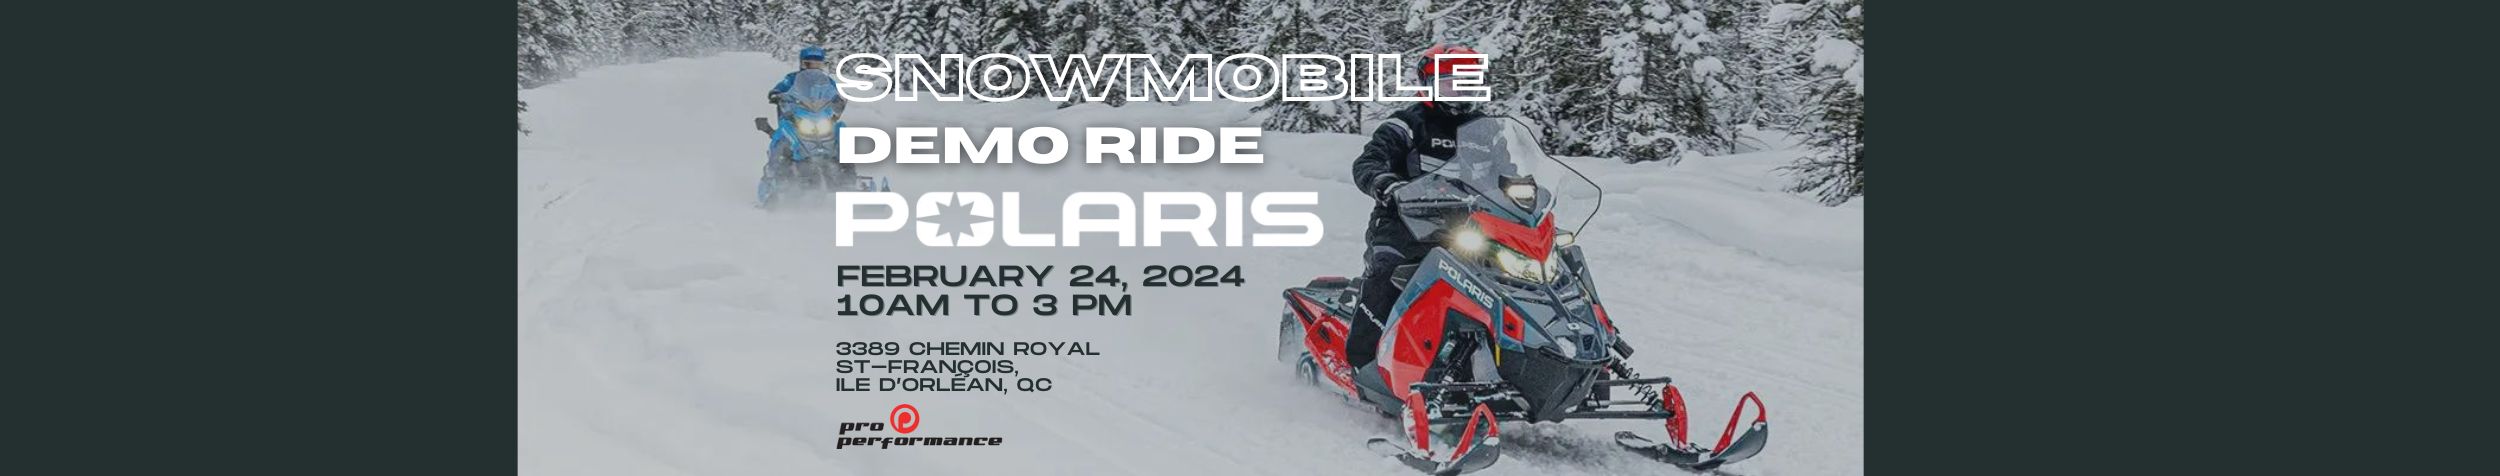 Come and try our polaris snowmobile